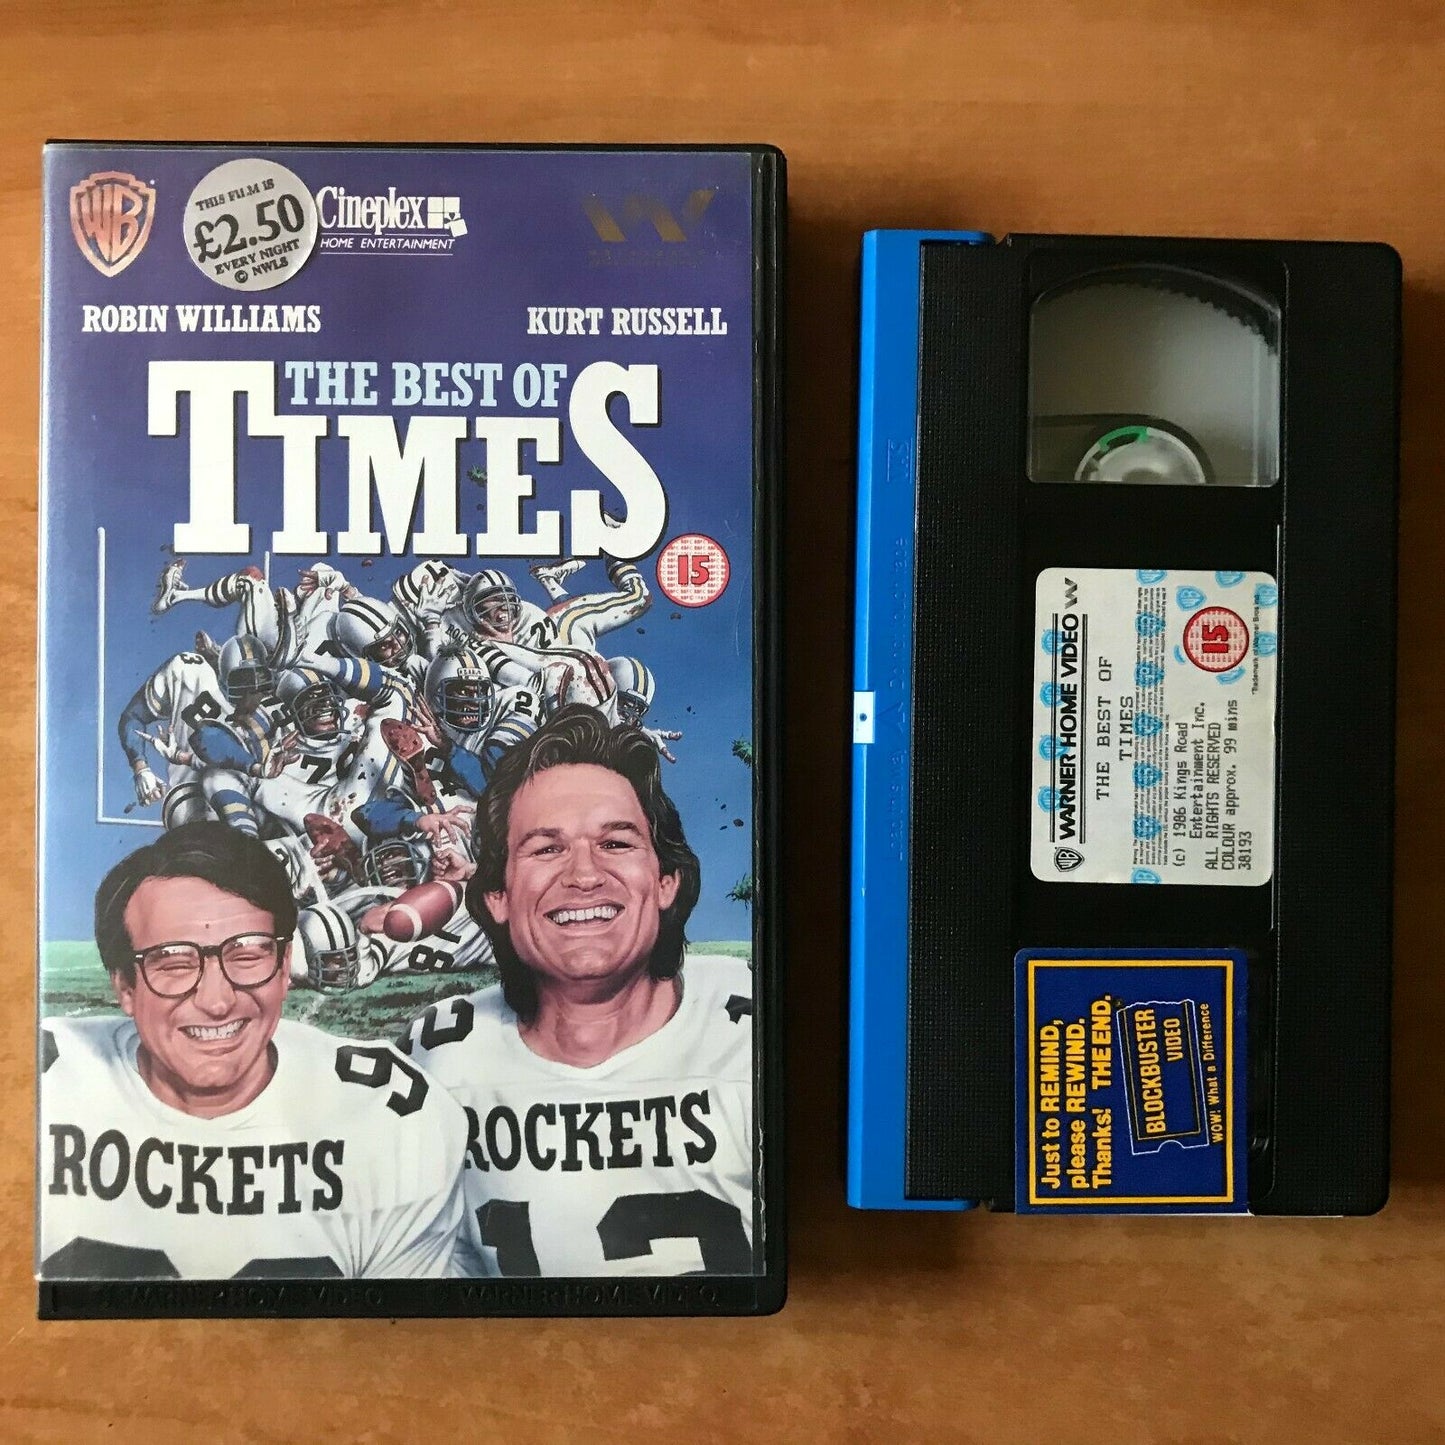 The Best of Times (1986)